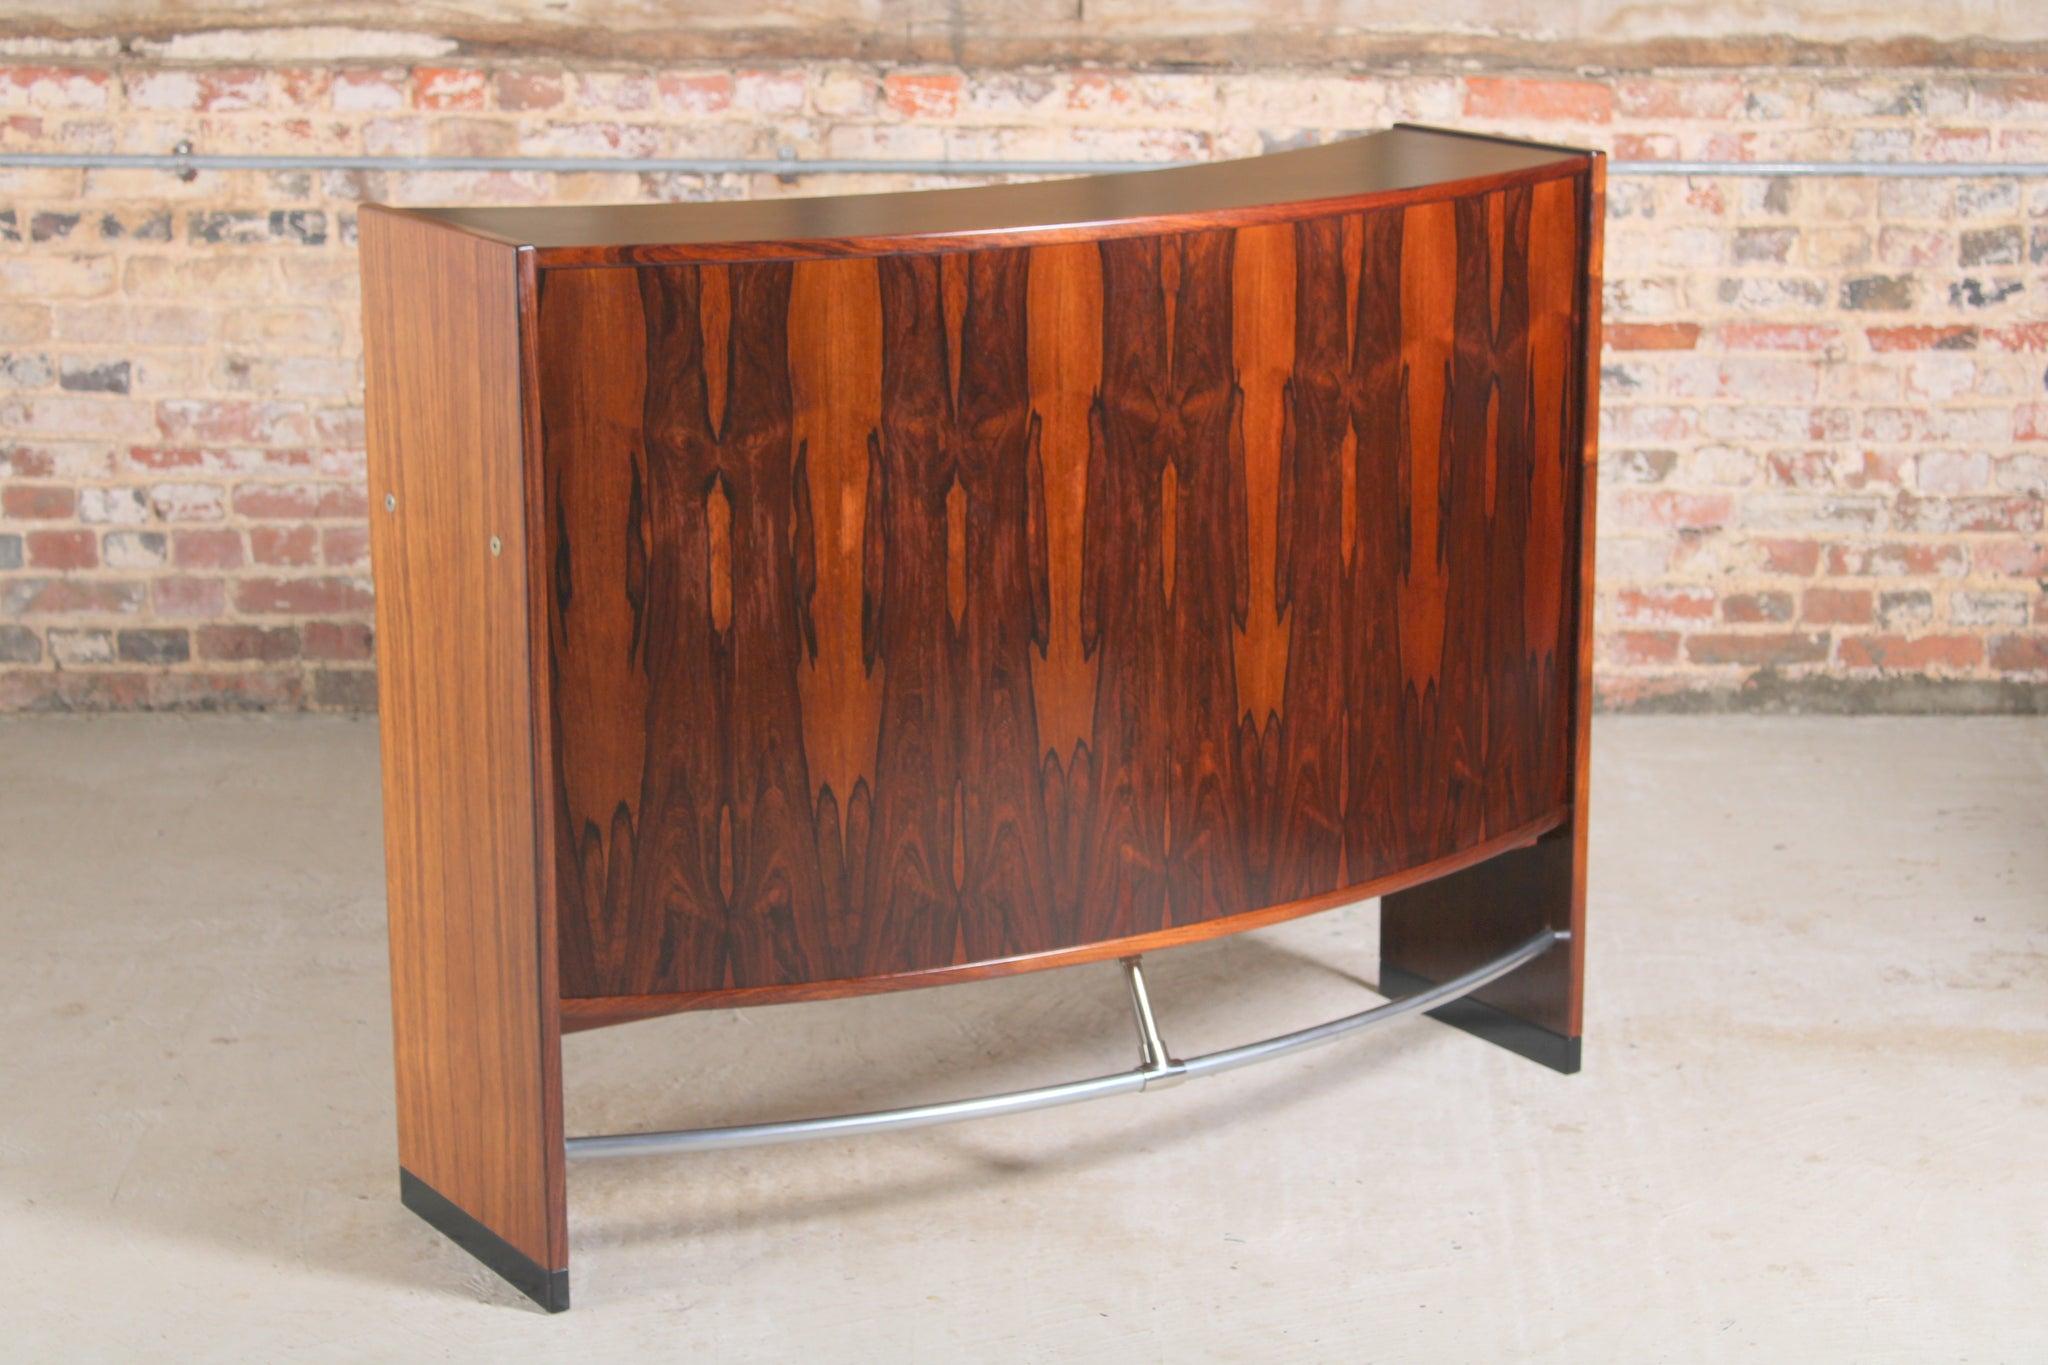 Danish Mid Century rosewood bar by Erik Buch for Dyrlund, circa 1960s. 2 sliding doors and 2 drawers with chrome handles. 7 bottle holders and a stainless steel footrest.

Dimension: W 130cm x H 105cm x D 55cm.

We offer international shipping,